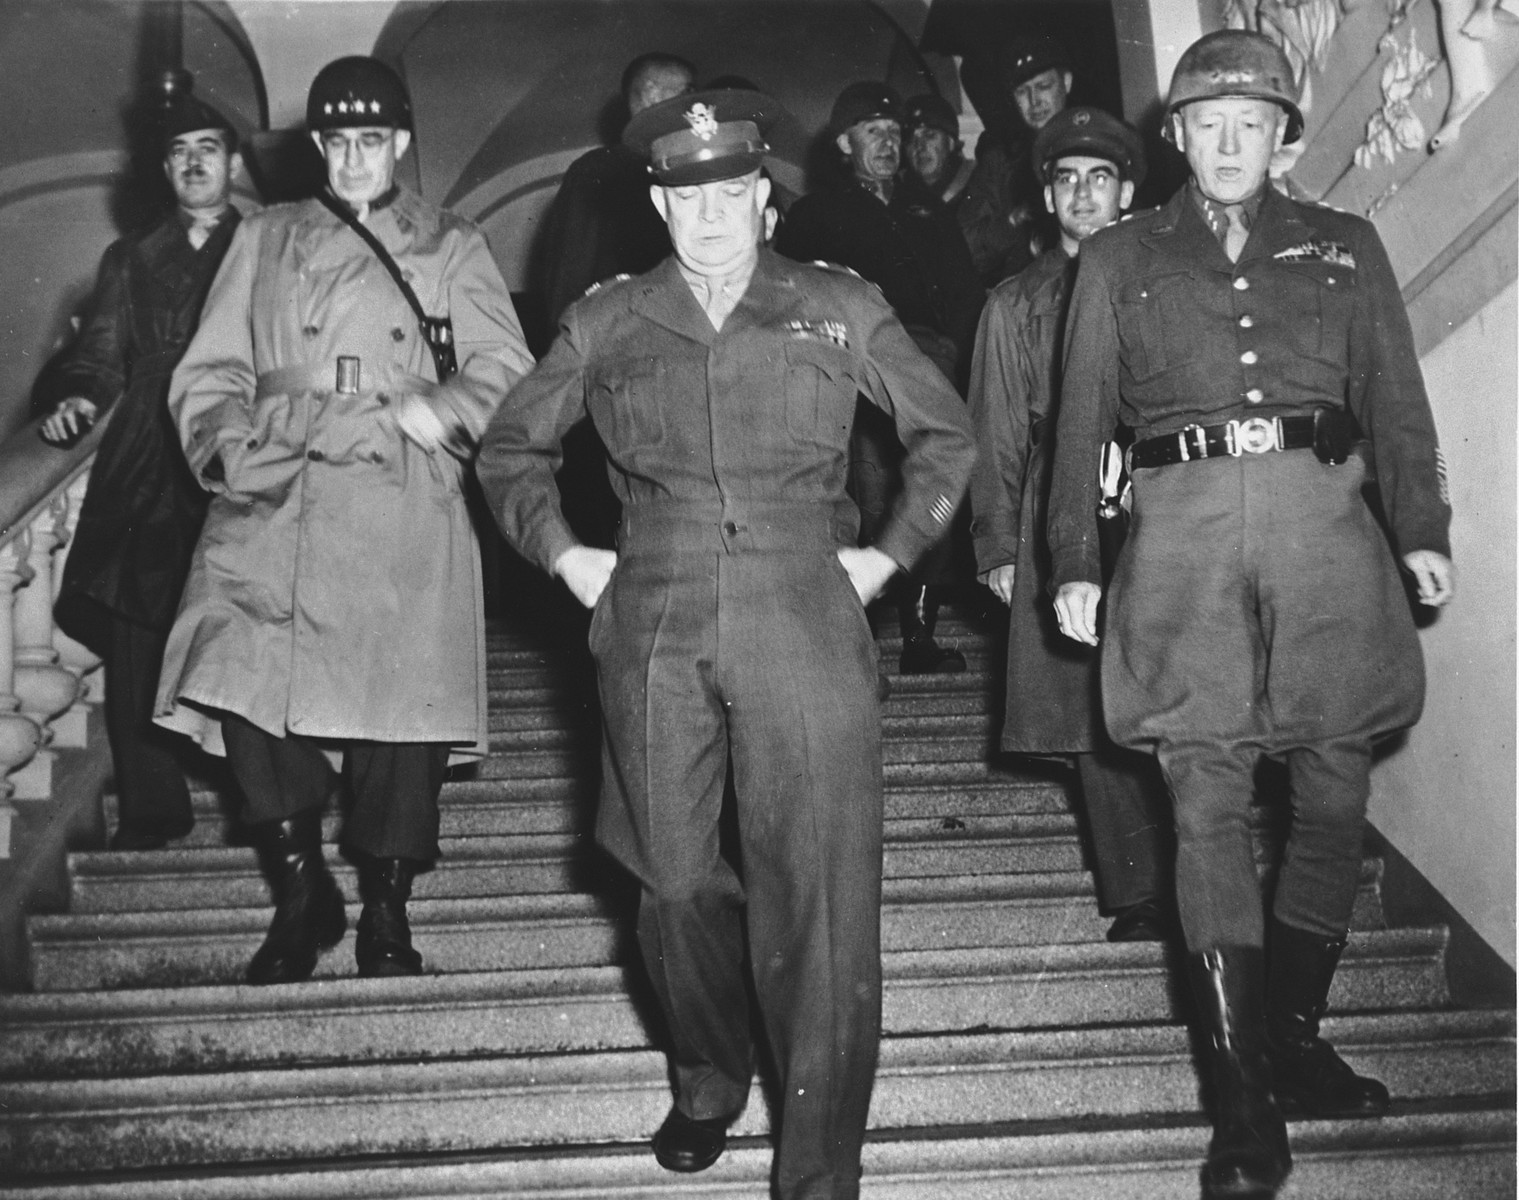 High-ranking U.S. Army officers descend the stairs at an unidentified army headquarters in Europe.

Pictured from left to right are: Lt. Gen. Omar K. Bradley, Gen. Dwight D. Eisenhower, and Lt. Gen. George S. Patton.  Sgt. Jules Grad, correspondent for the newspaper, "Stars and Stripes", walks behind Patton.